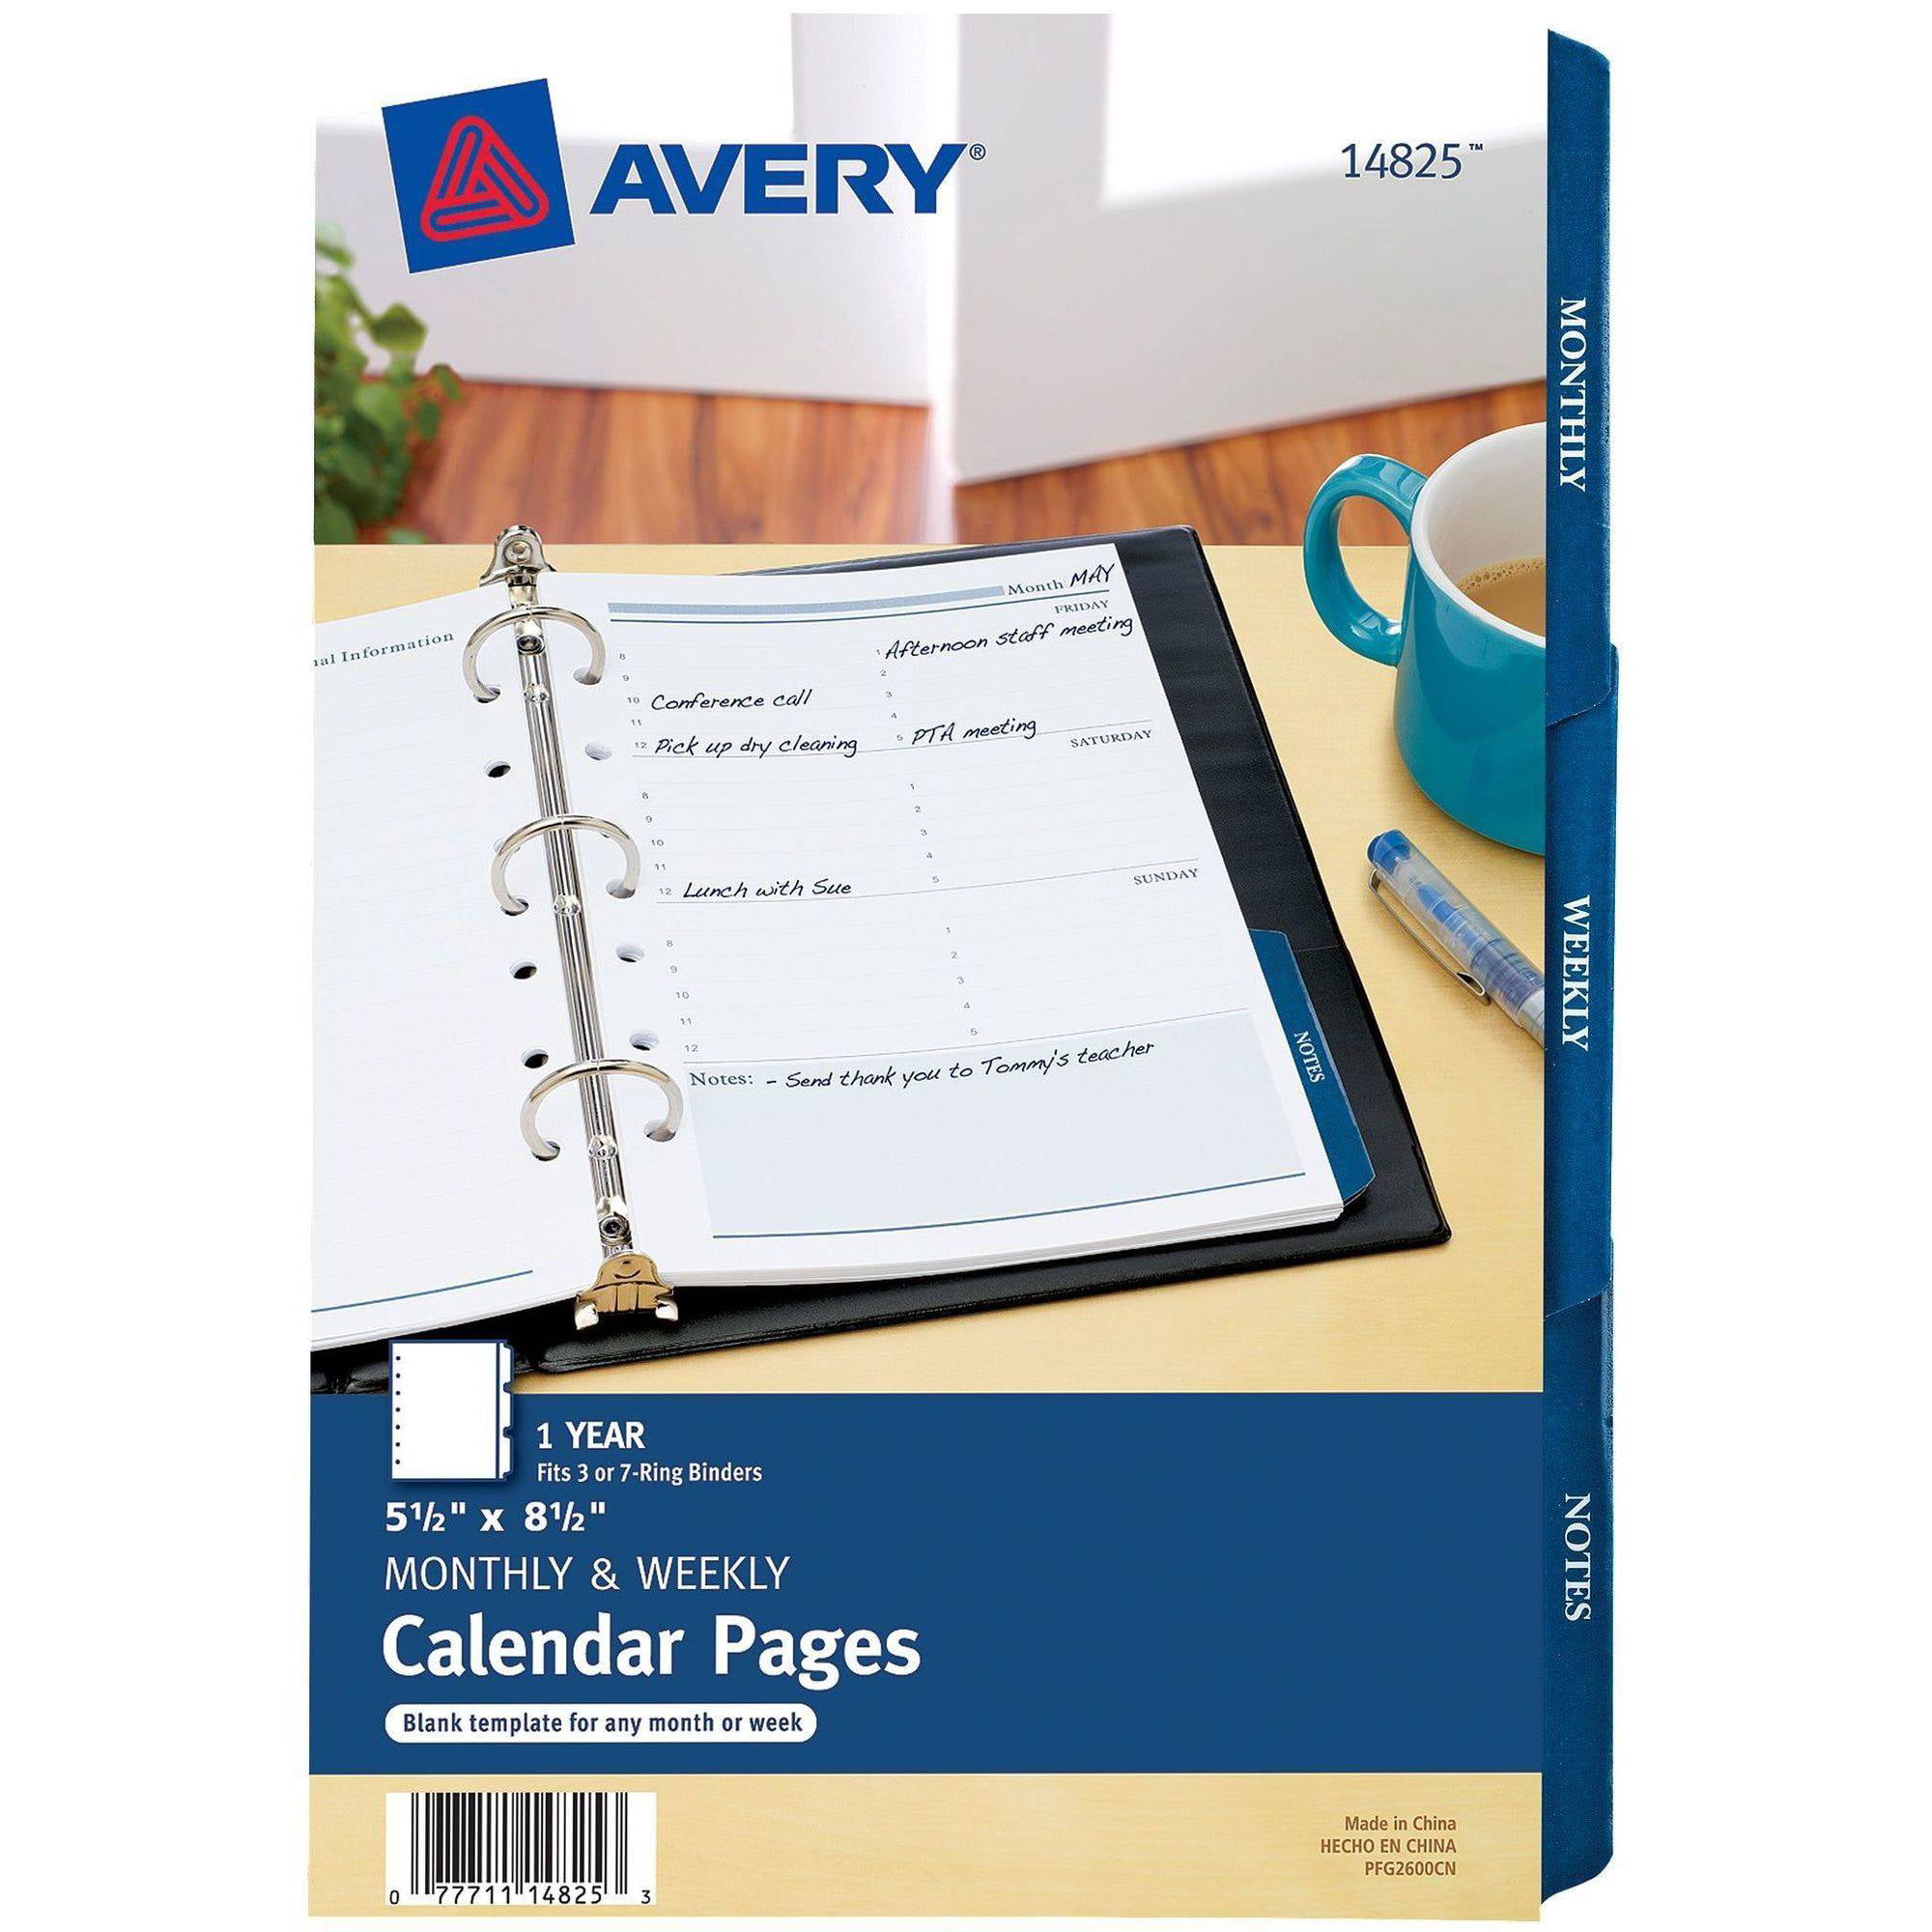 Avery Monthly/Weekly Calendar Refill Pages - Walmart.com